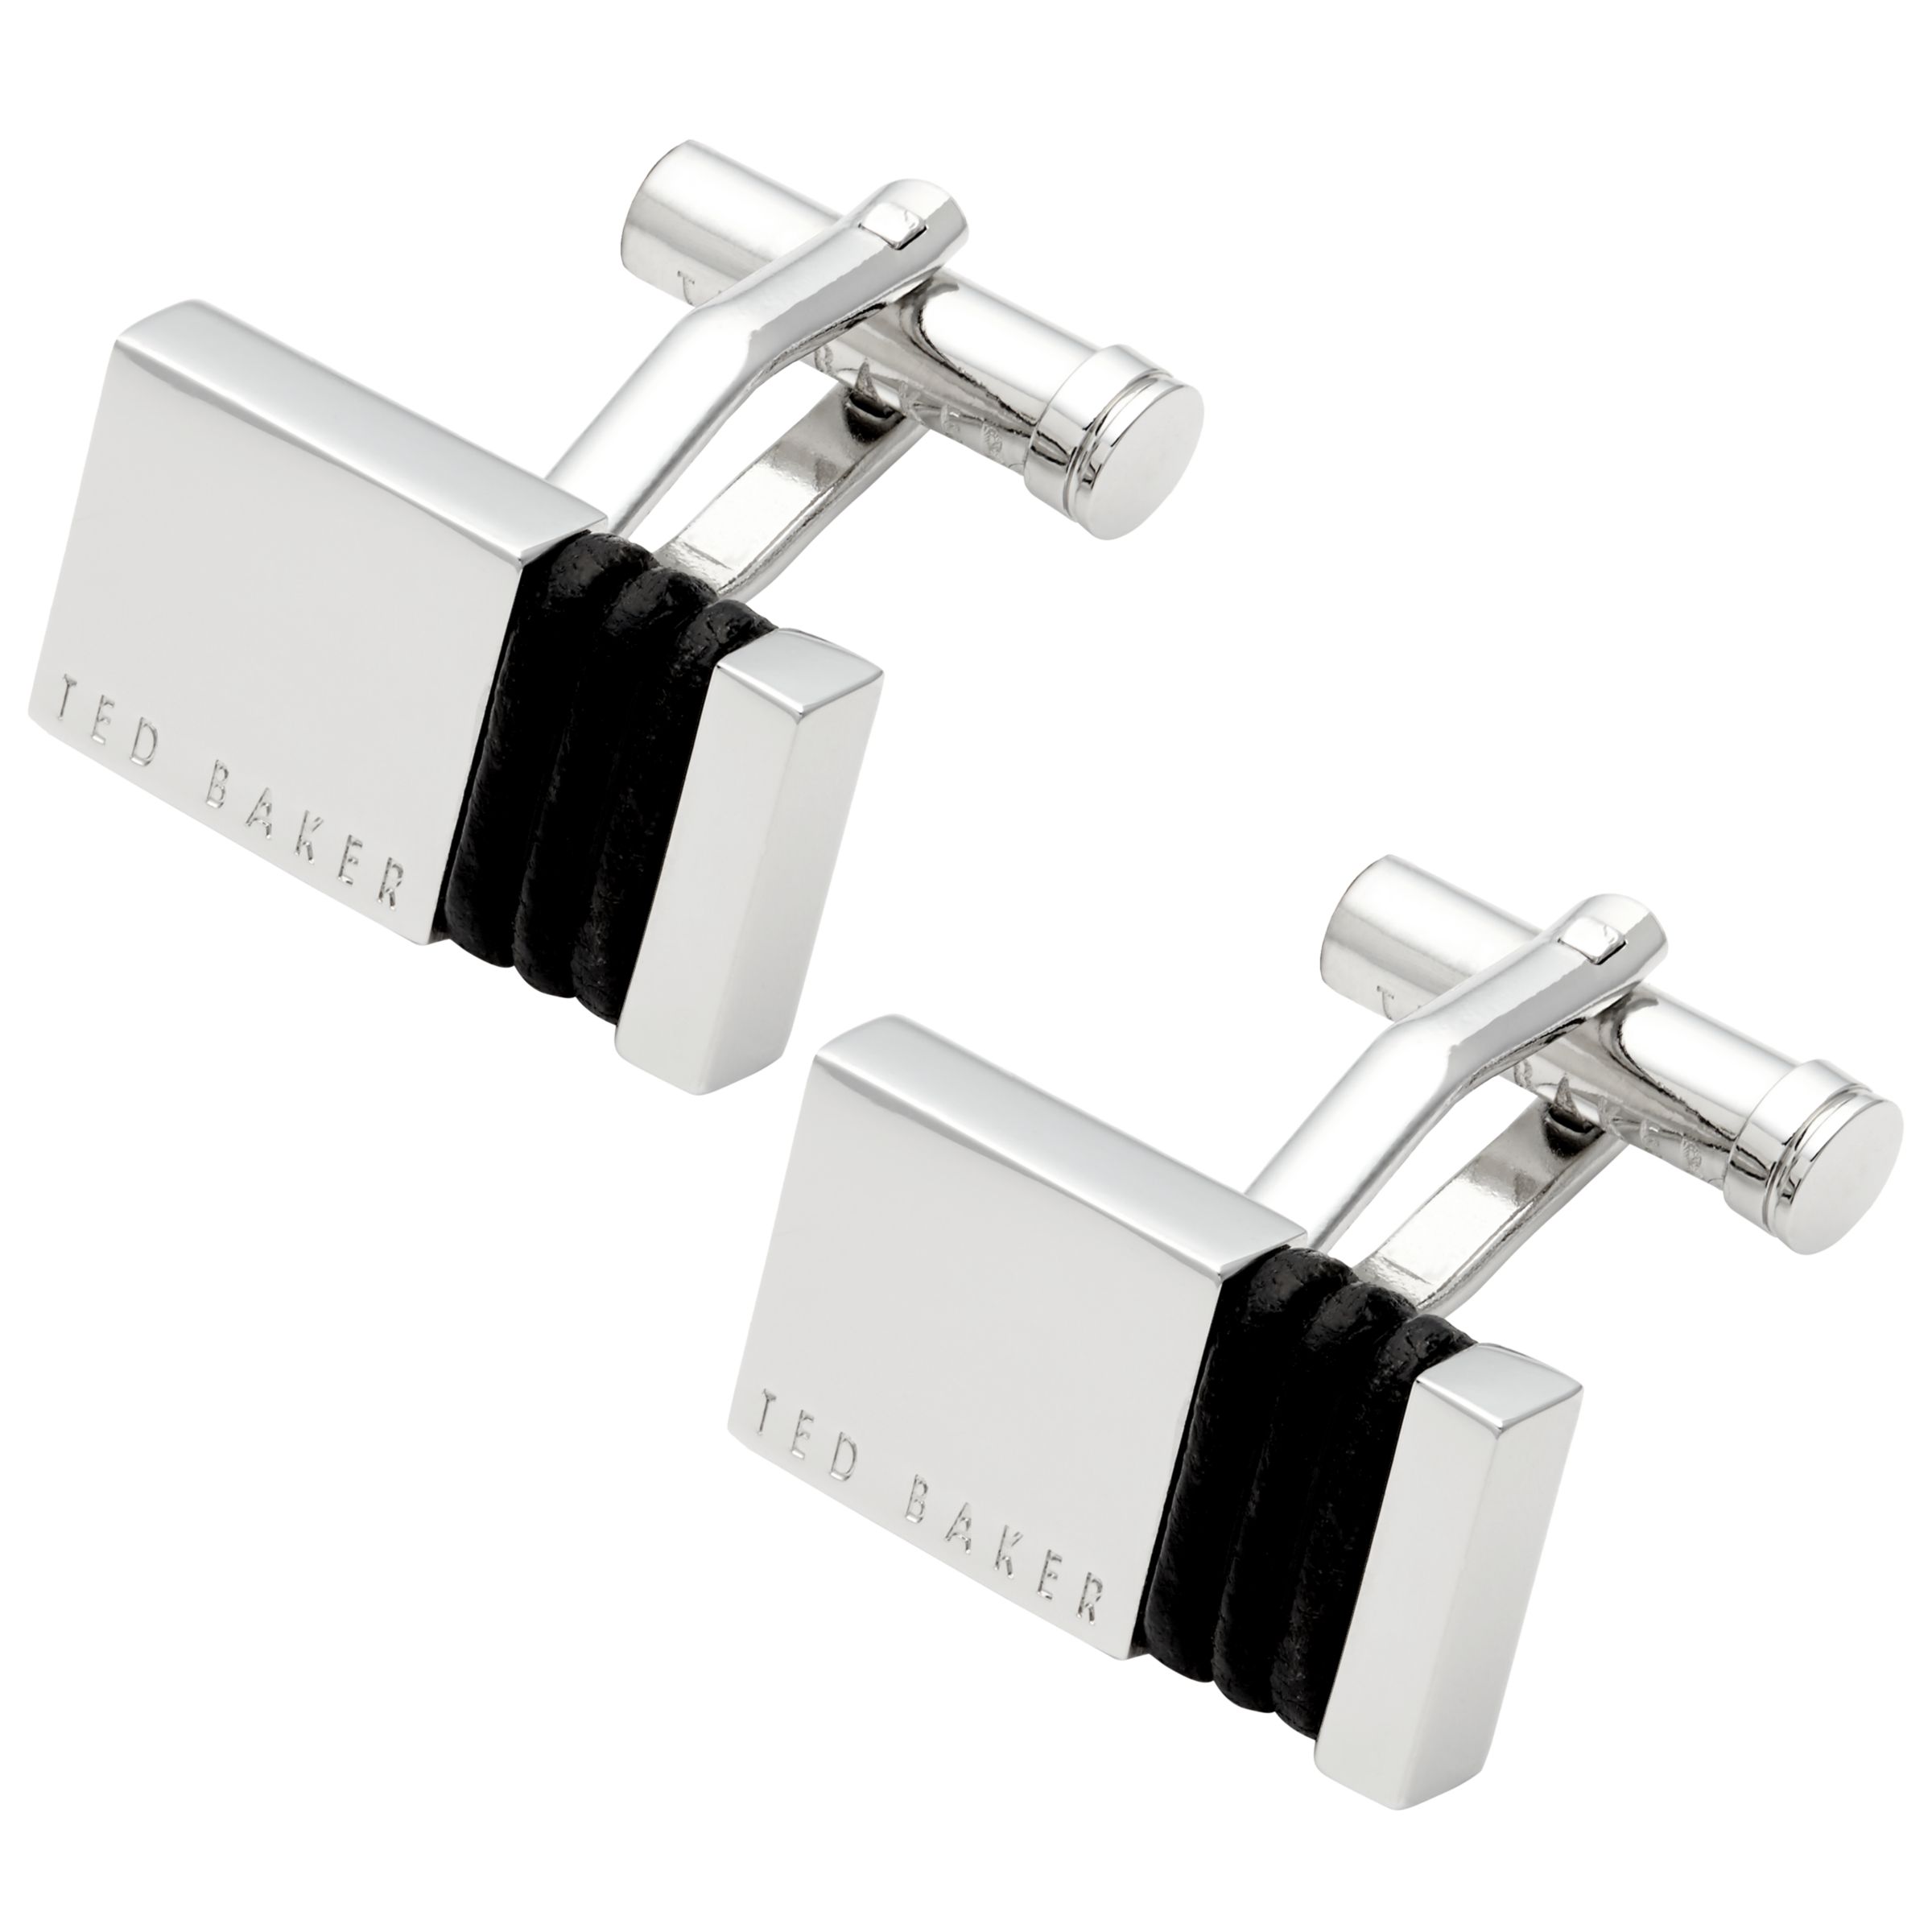 Buy Ted Baker Wrapped Metal Leather Cufflinks, Silver/Black Online at johnlewis.com